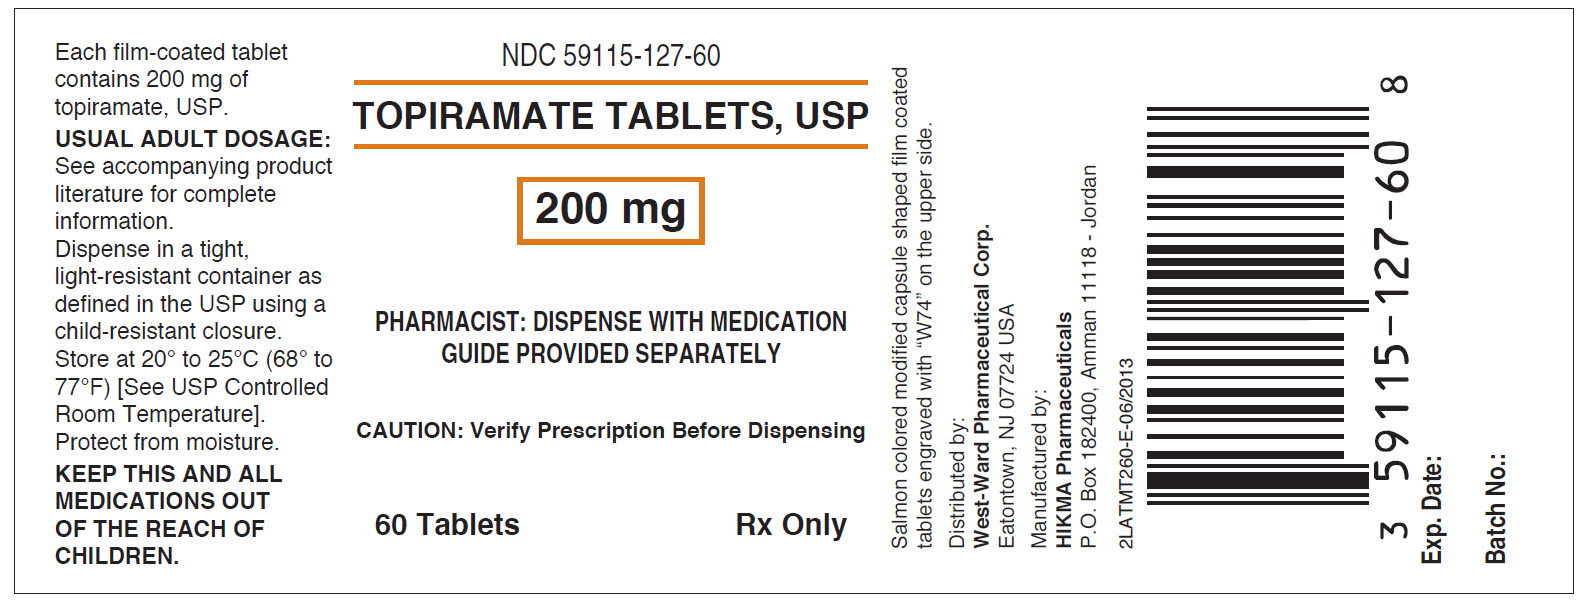 NDC 59115-127-60 Topiramate Tablets, USP 200 mg Rx only 60 TABLETS